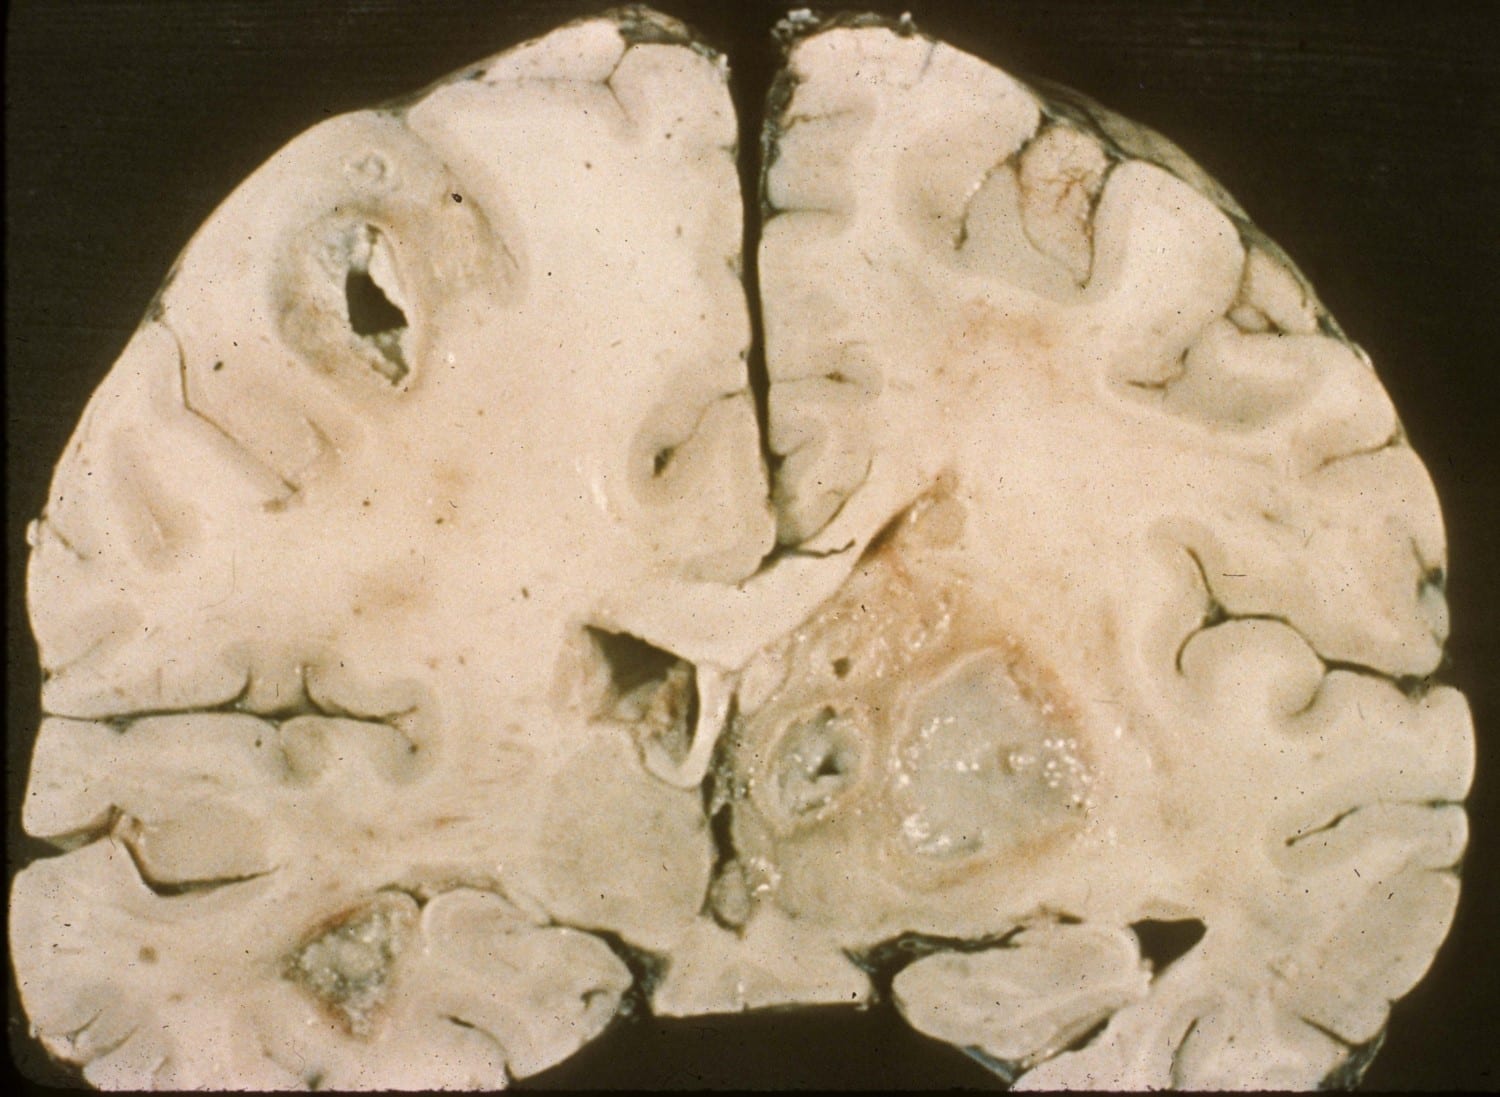 Coronal section showing multiple well-circumscribed brain lesions